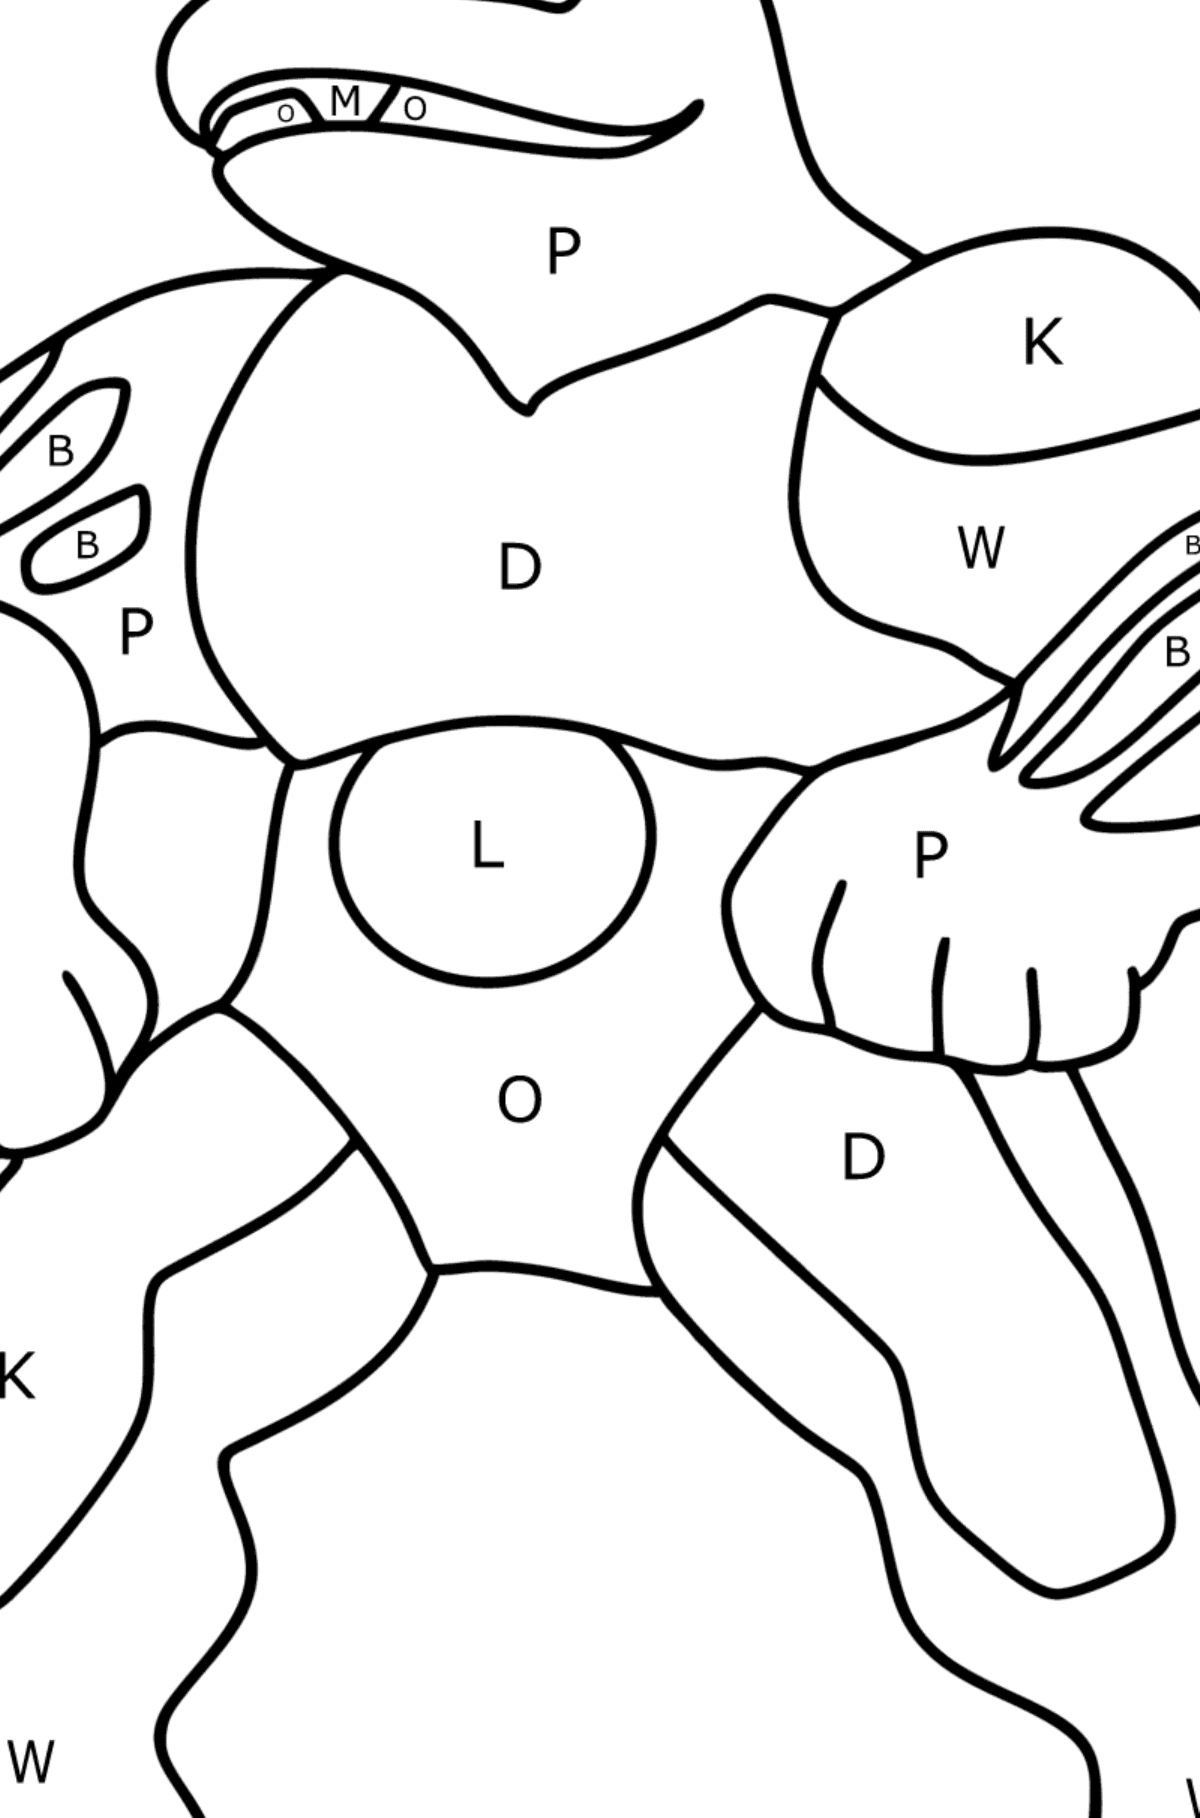 Coloring page Pokemon Go Machoke - Coloring by Letters for Kids